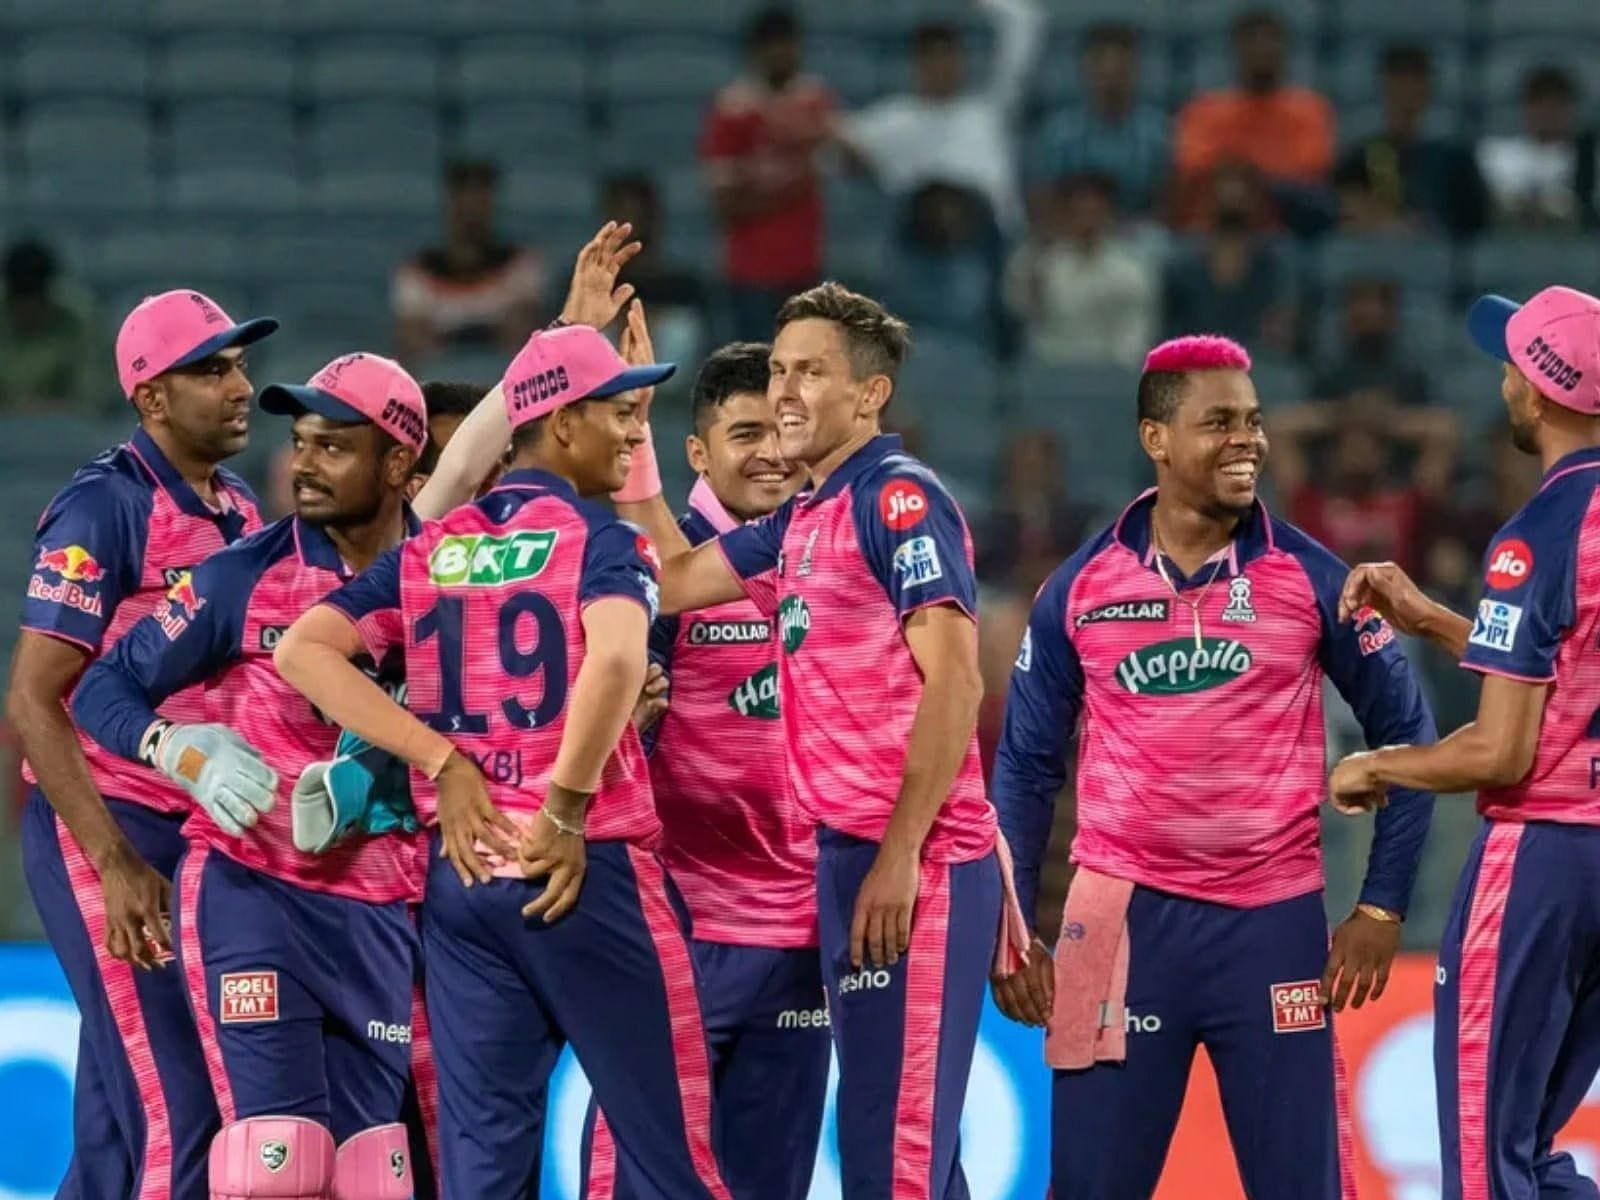 The Rajasthan Royals finished as the runners-up in IPL 2022.